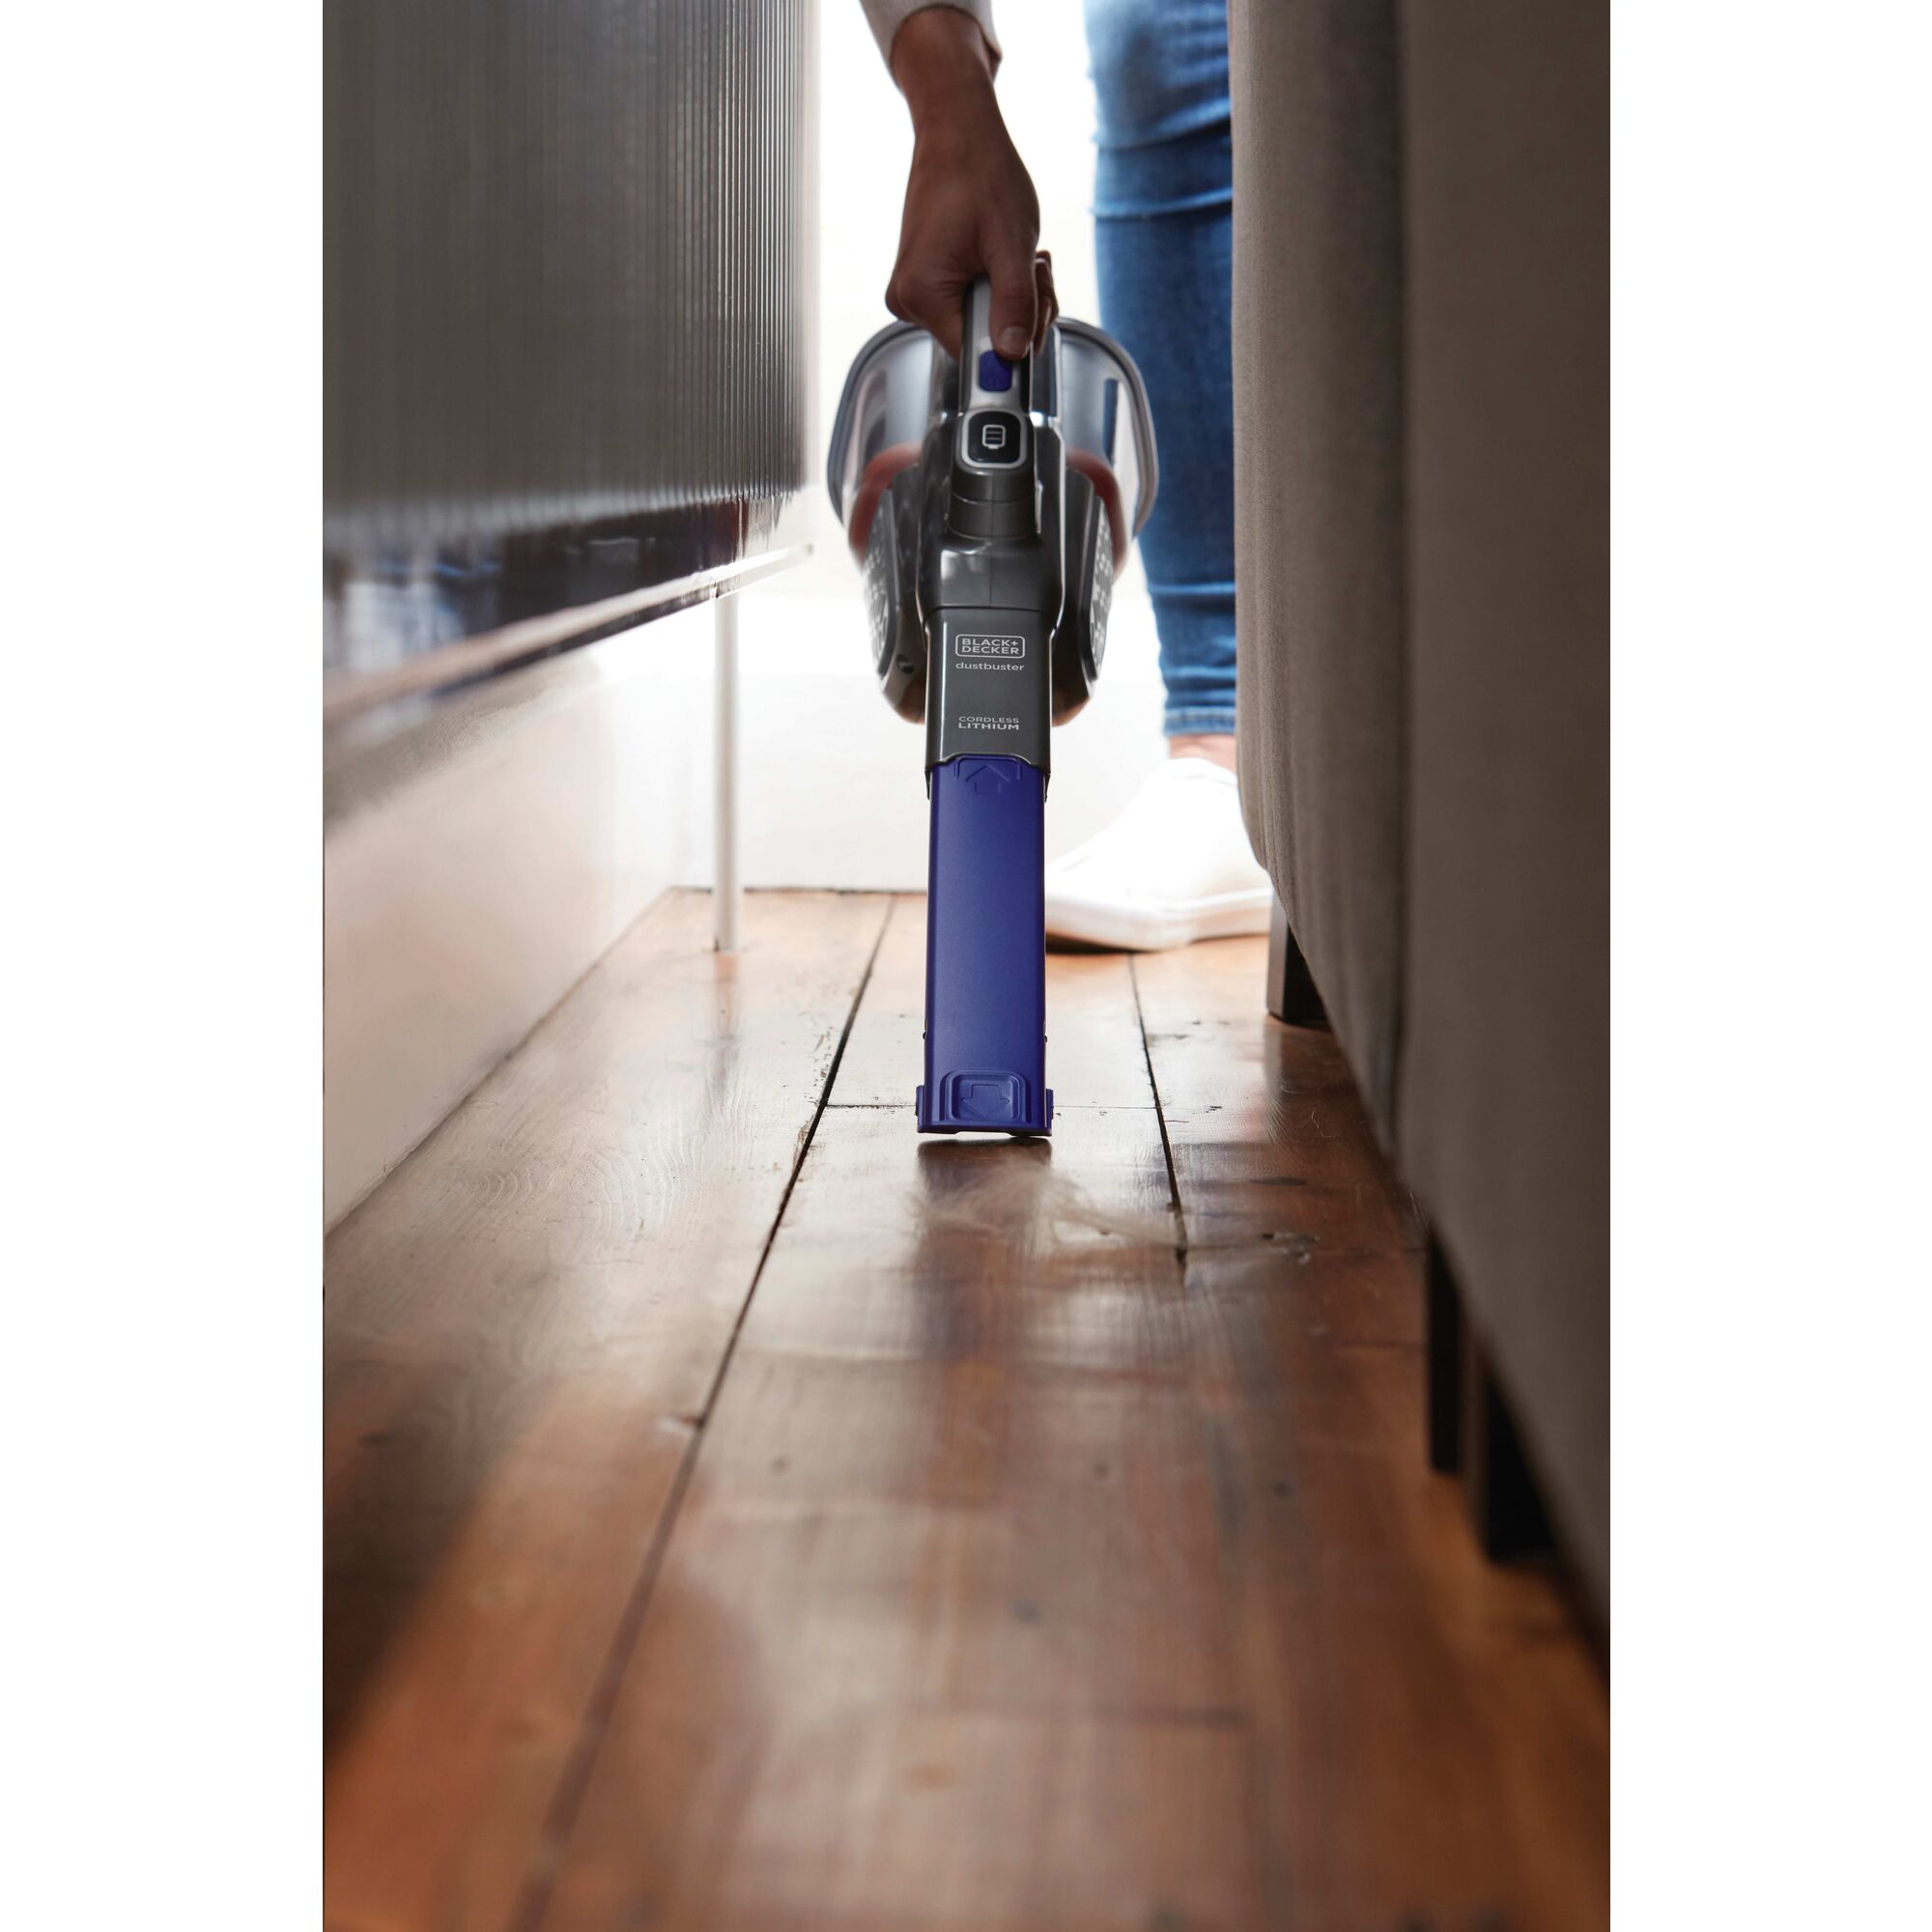 dustbuster AdvancedClean pet cordless hand vacuum being used by a person to clean hard to reach wooden floor space.